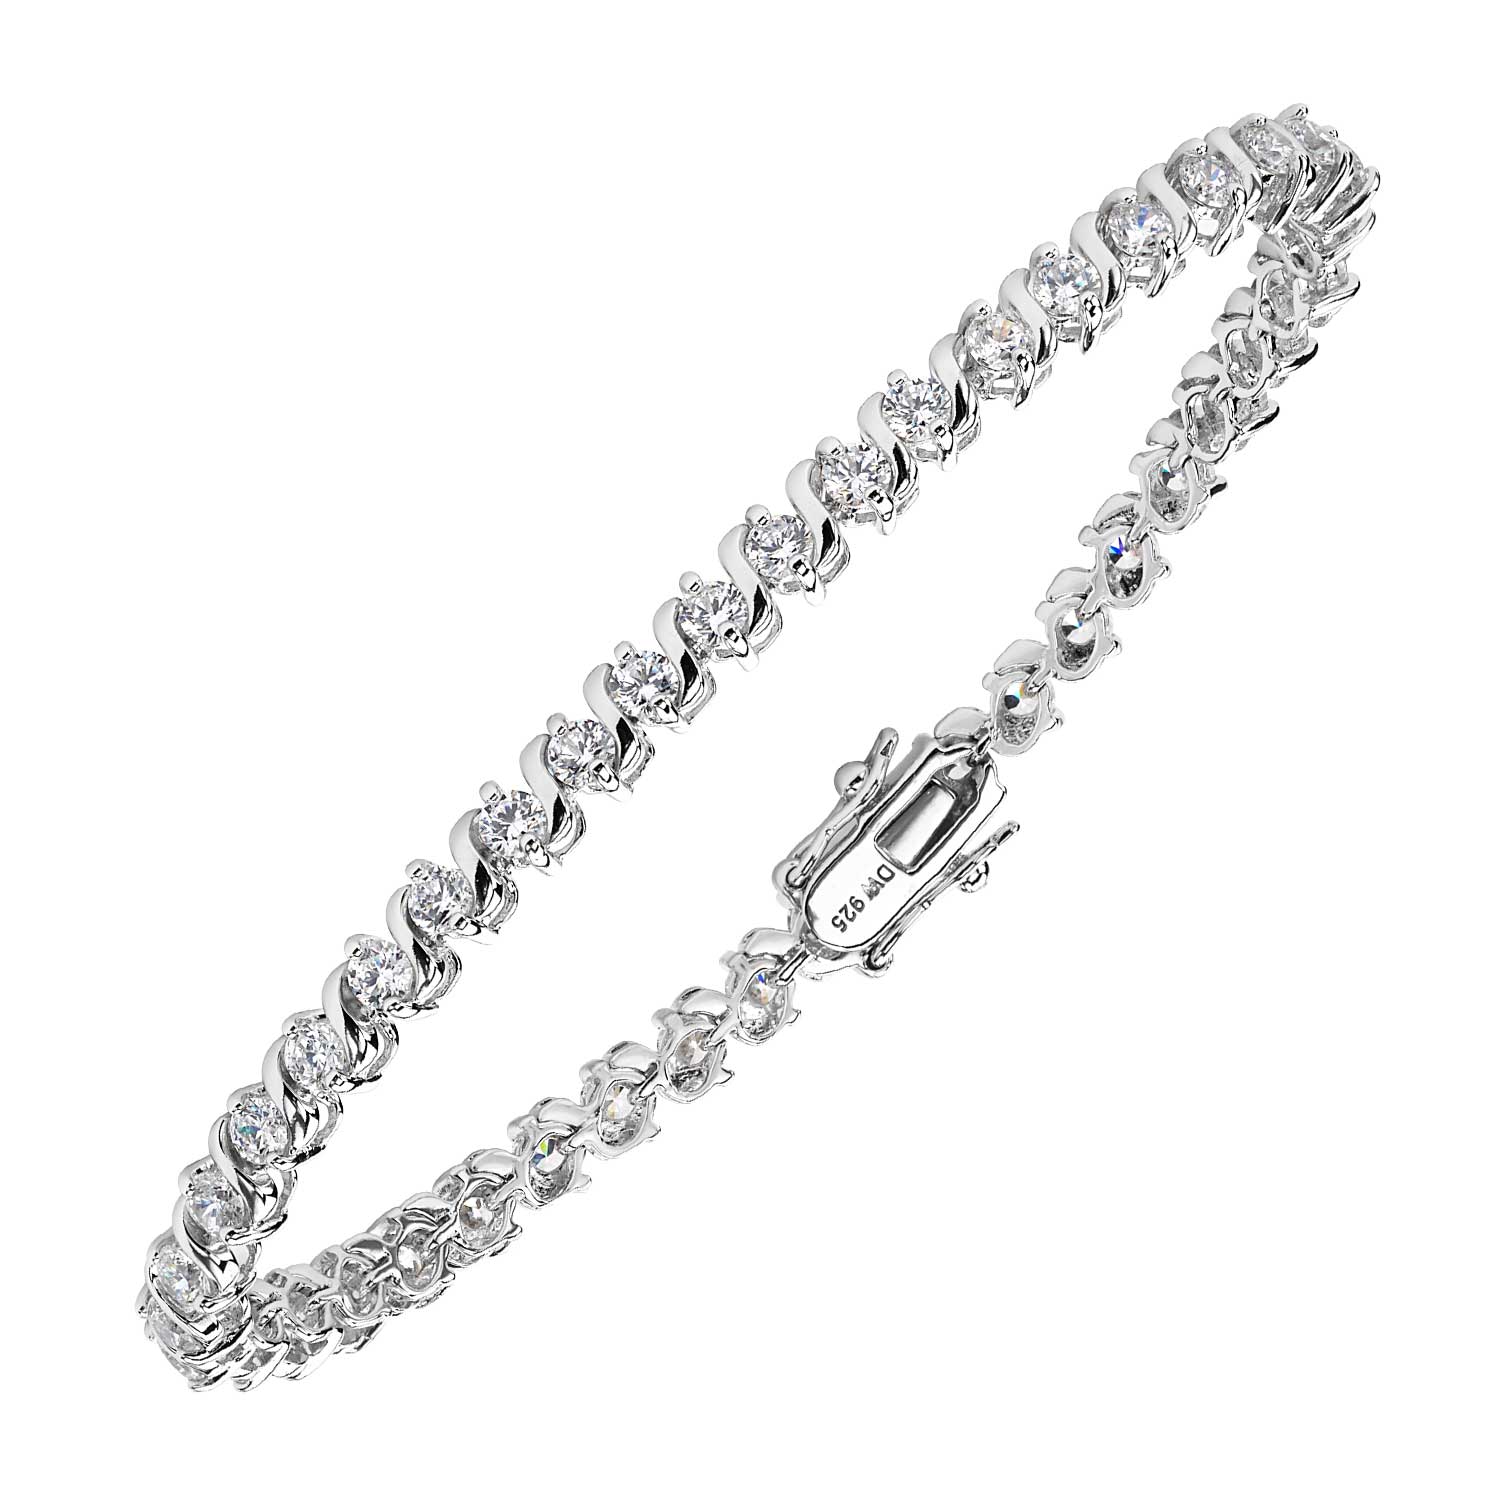 Gorgeously hand-crafted line bracelet in bright tarnish resistant rhodium plated sterling silver and high quality cubic zirconias finished with a safety clasp; this bracelet is exquisite and well priced.